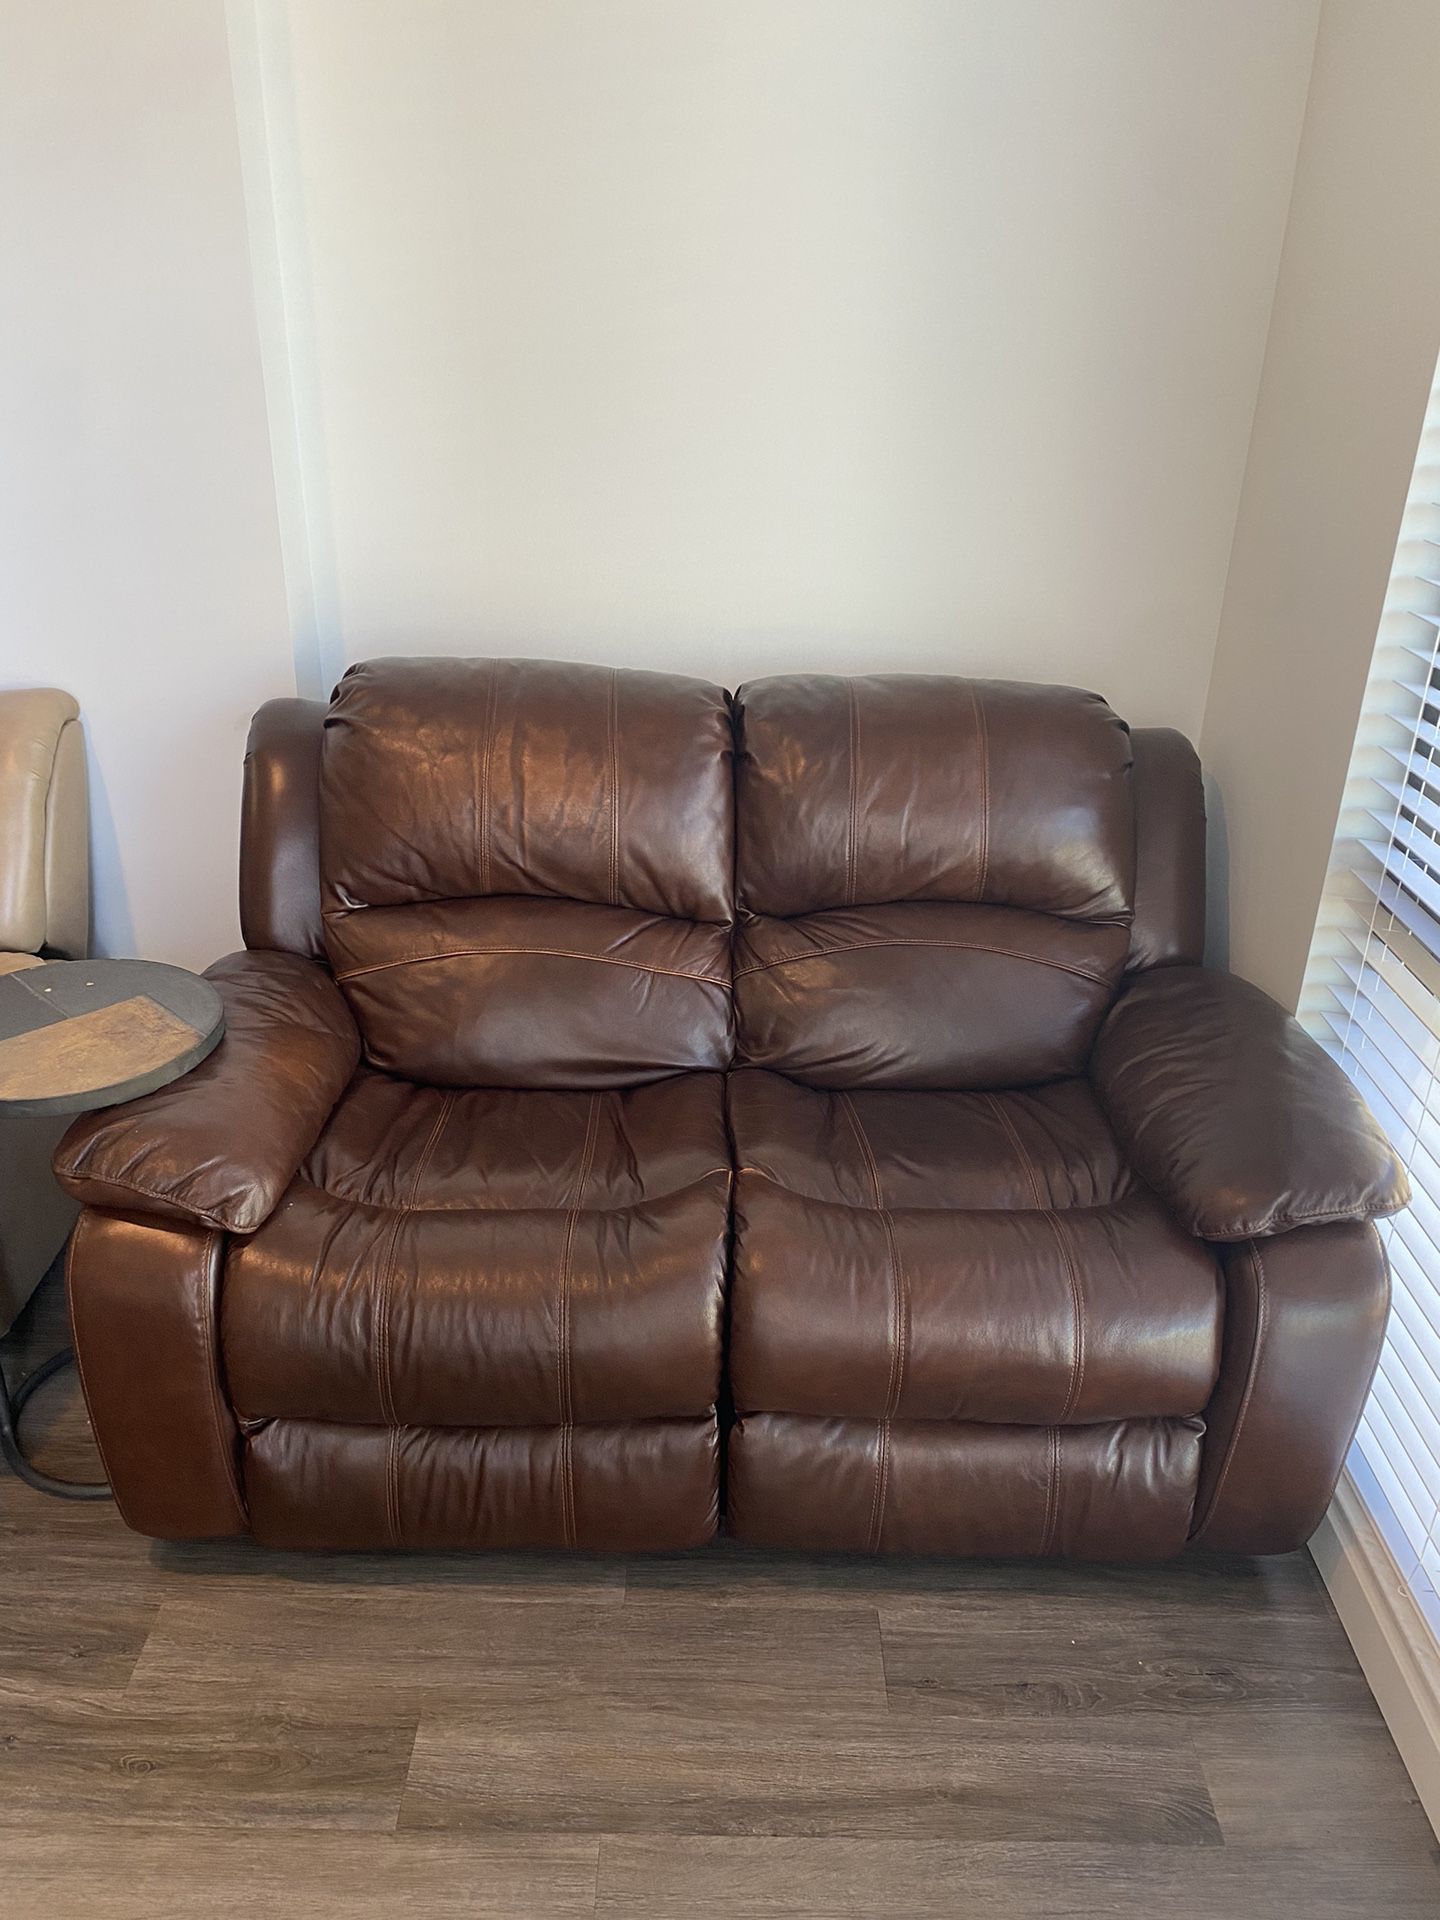 Two Leather Recliner Couches